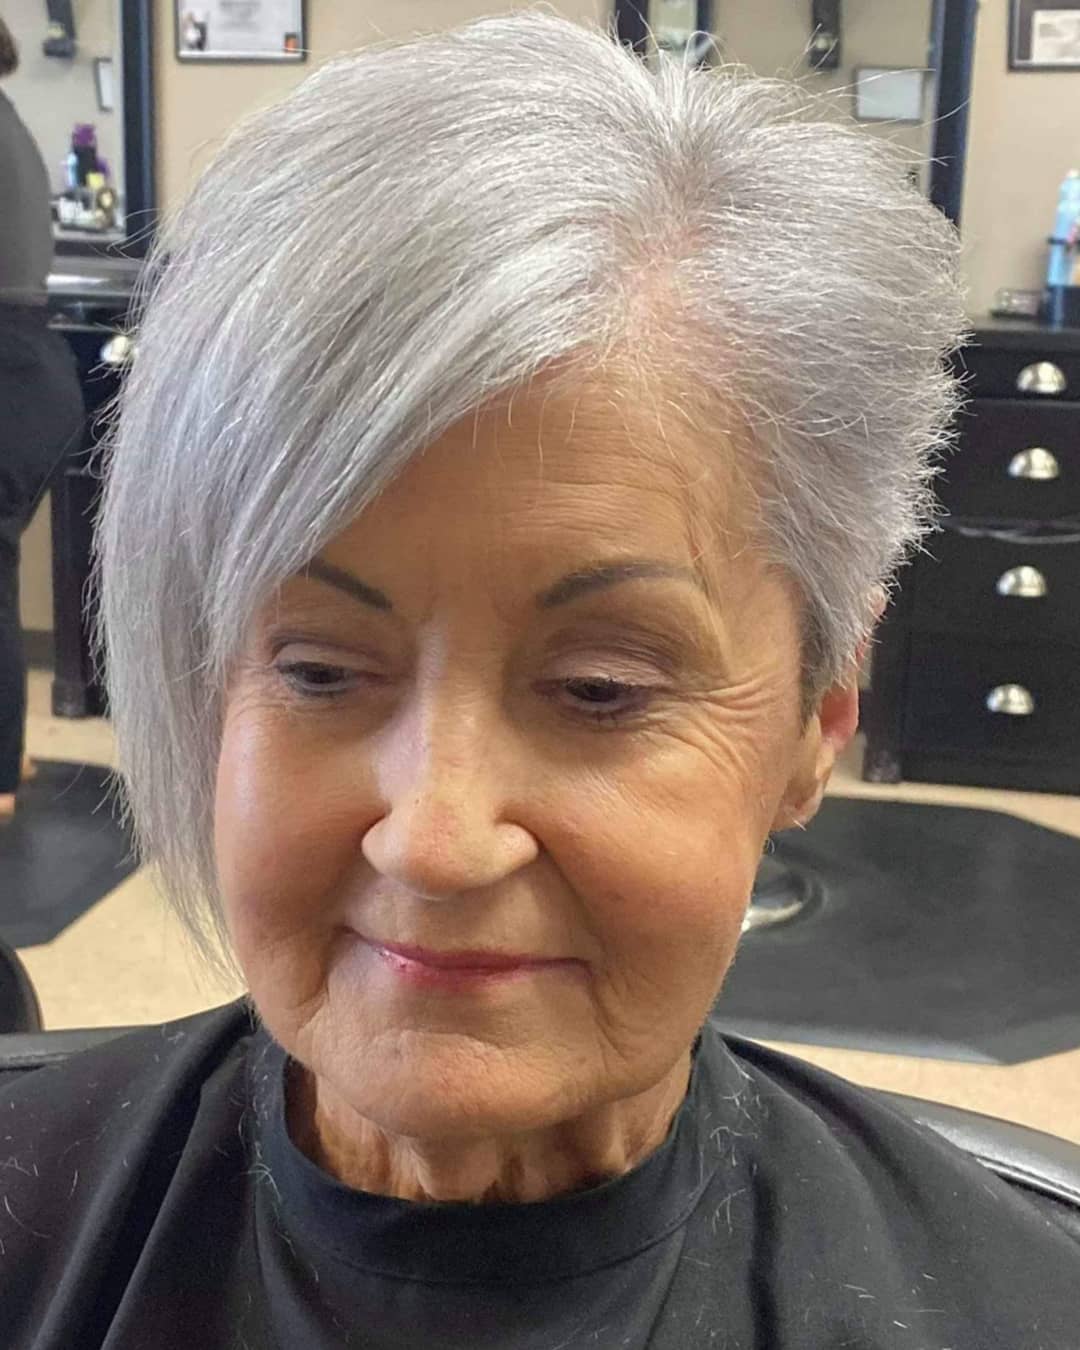 Edgy gray pixie cut with long bangs